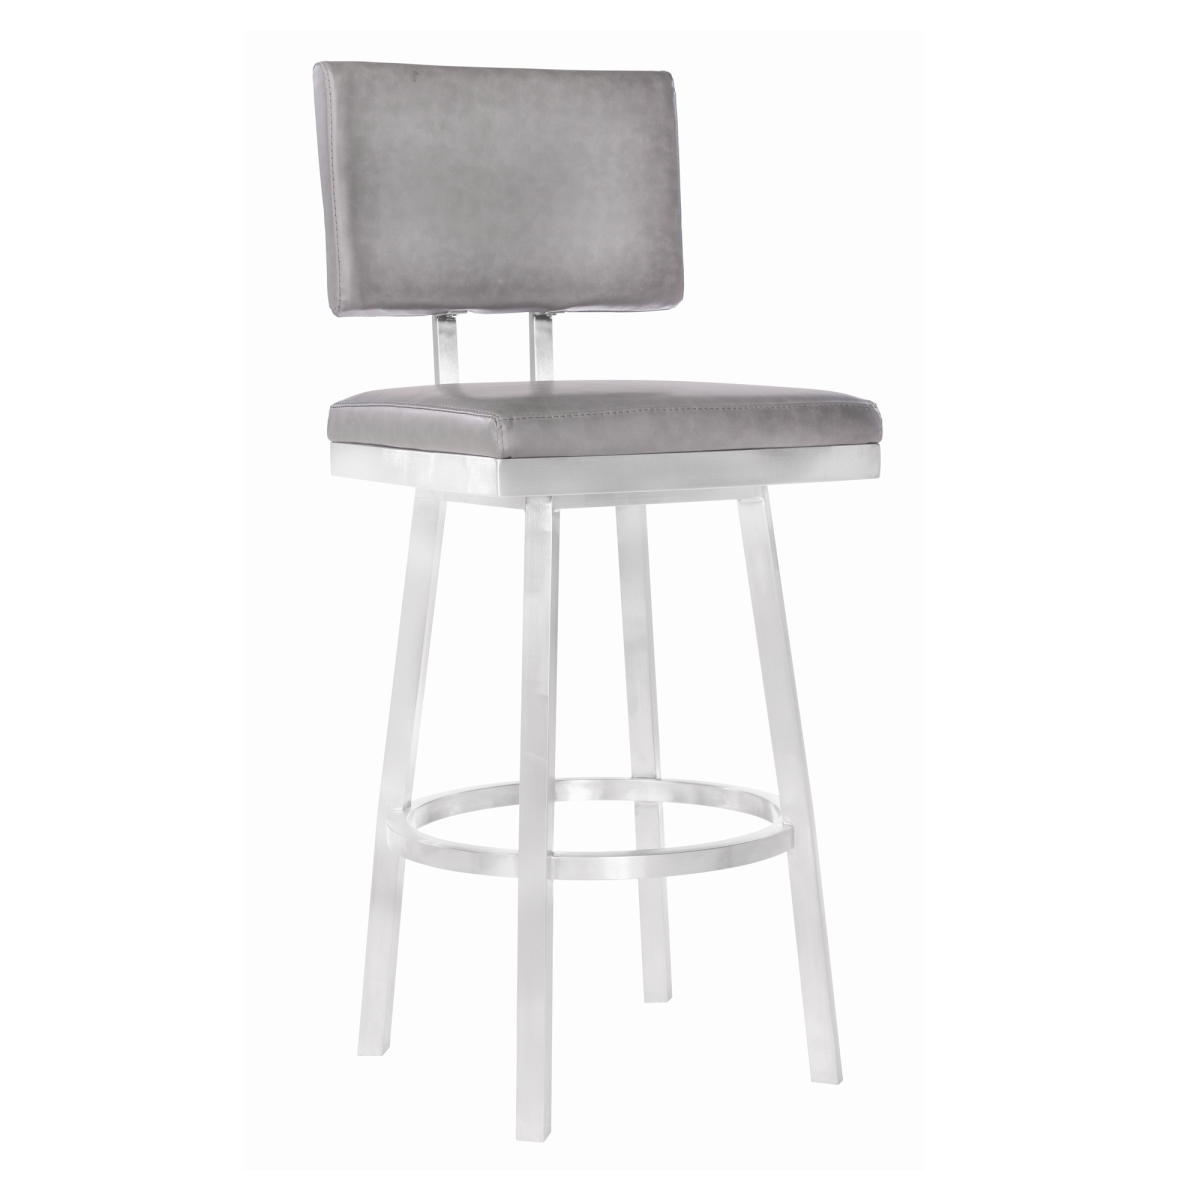 Gfancy Fixtures 30 in. Vintage Gray on Stainless Faux Leather Rectangular Swivel Armless Barstool